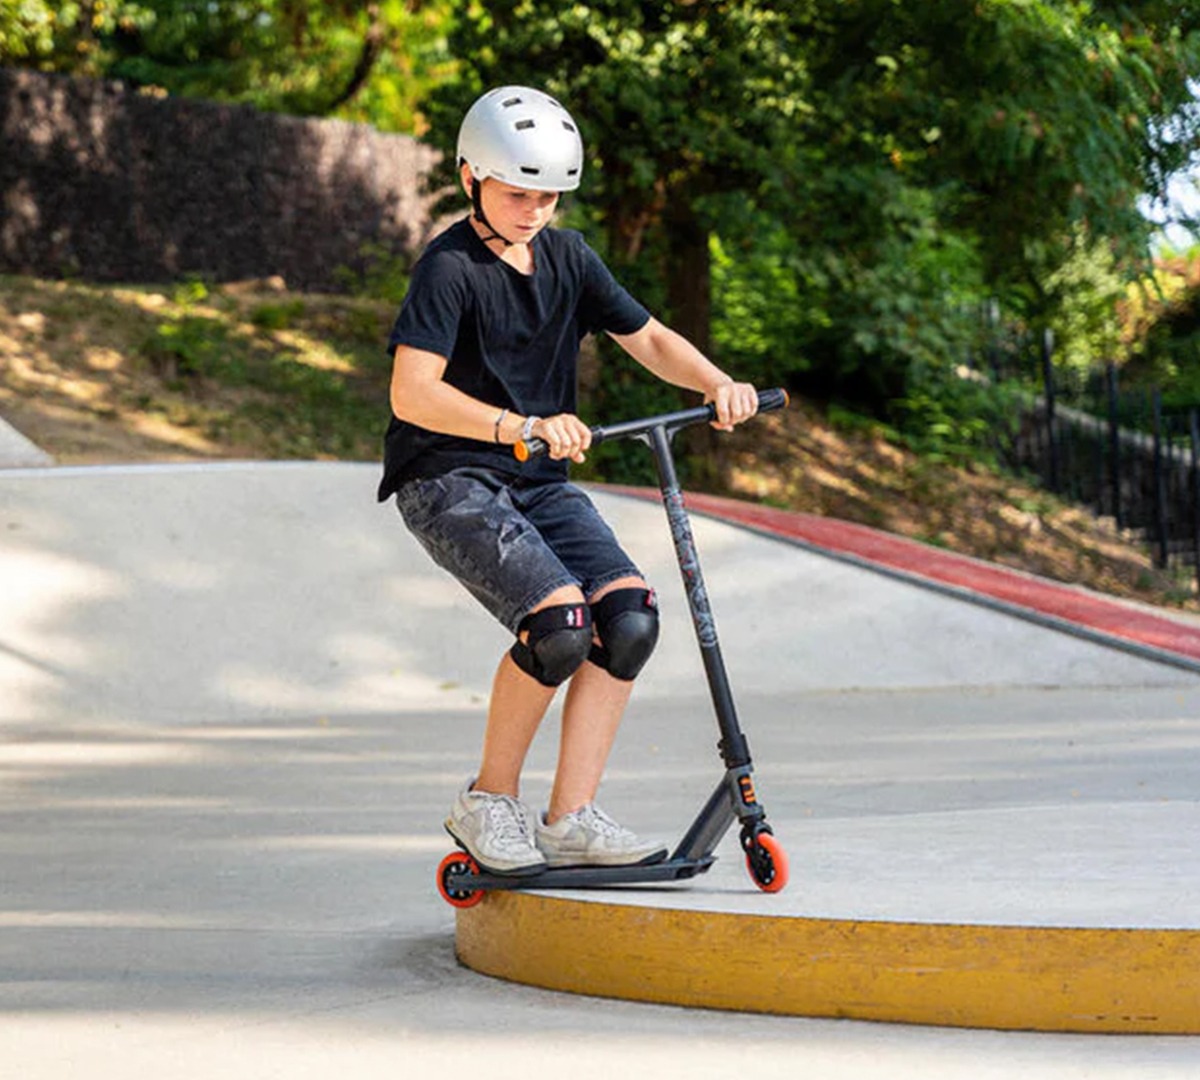 Scooter-Helmets-and-pads-Top-Rated-Skates-and-Scooters-for-all-Ages-and-Skill-Levels-at-Decathlon